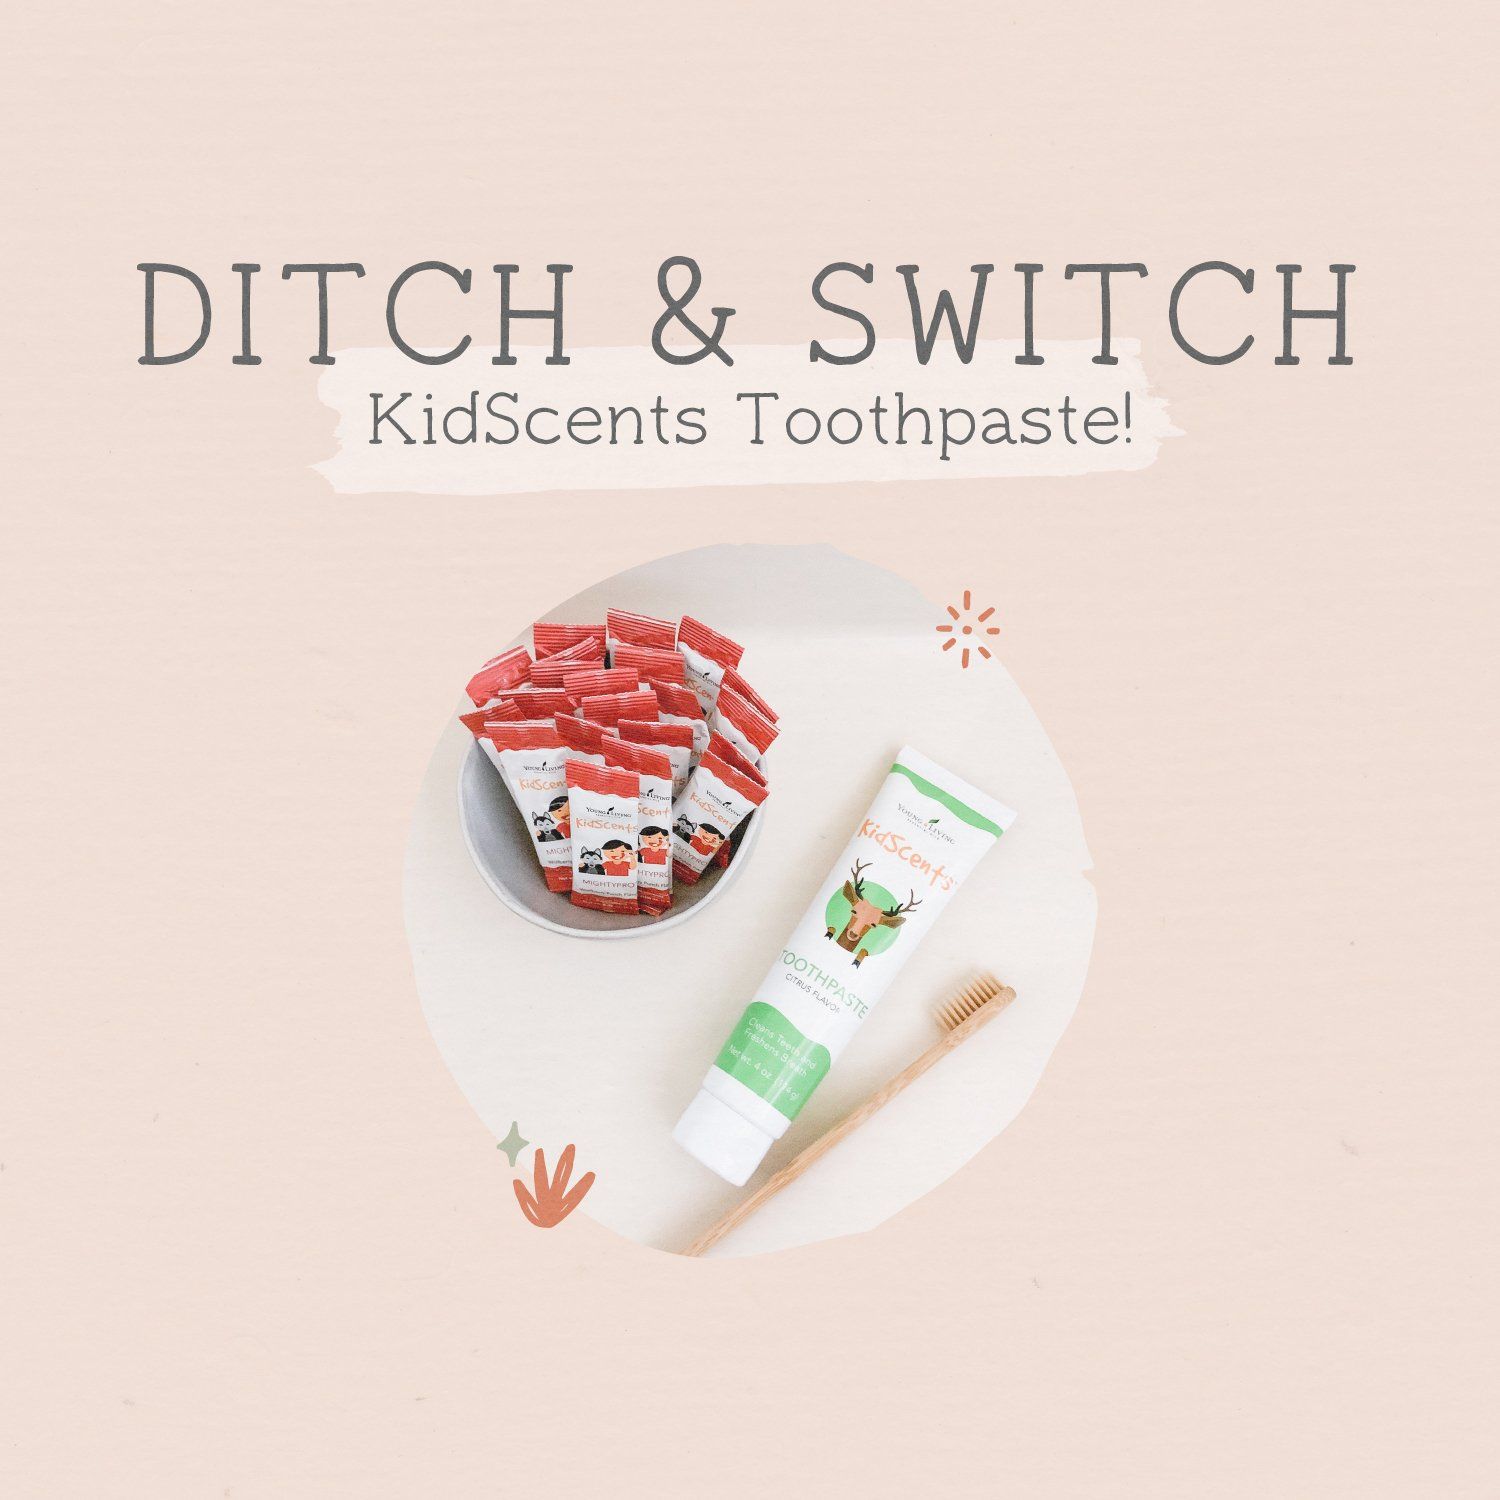 Ditch & Switch Kids Toothpaste